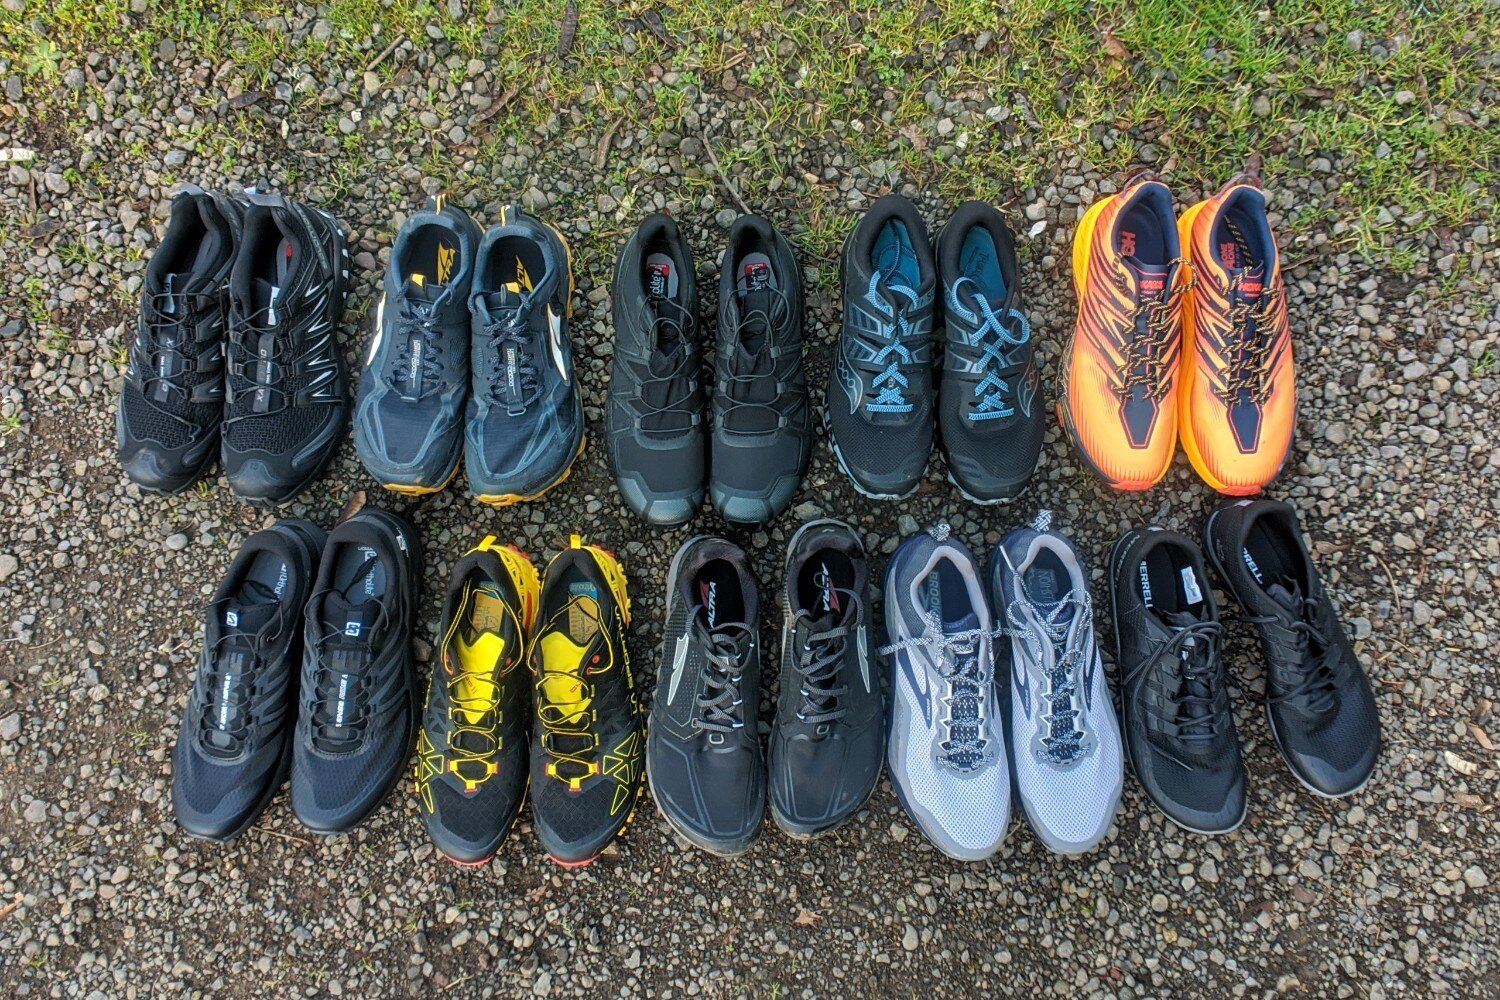 We own and use all of the trail running shoes we recommend